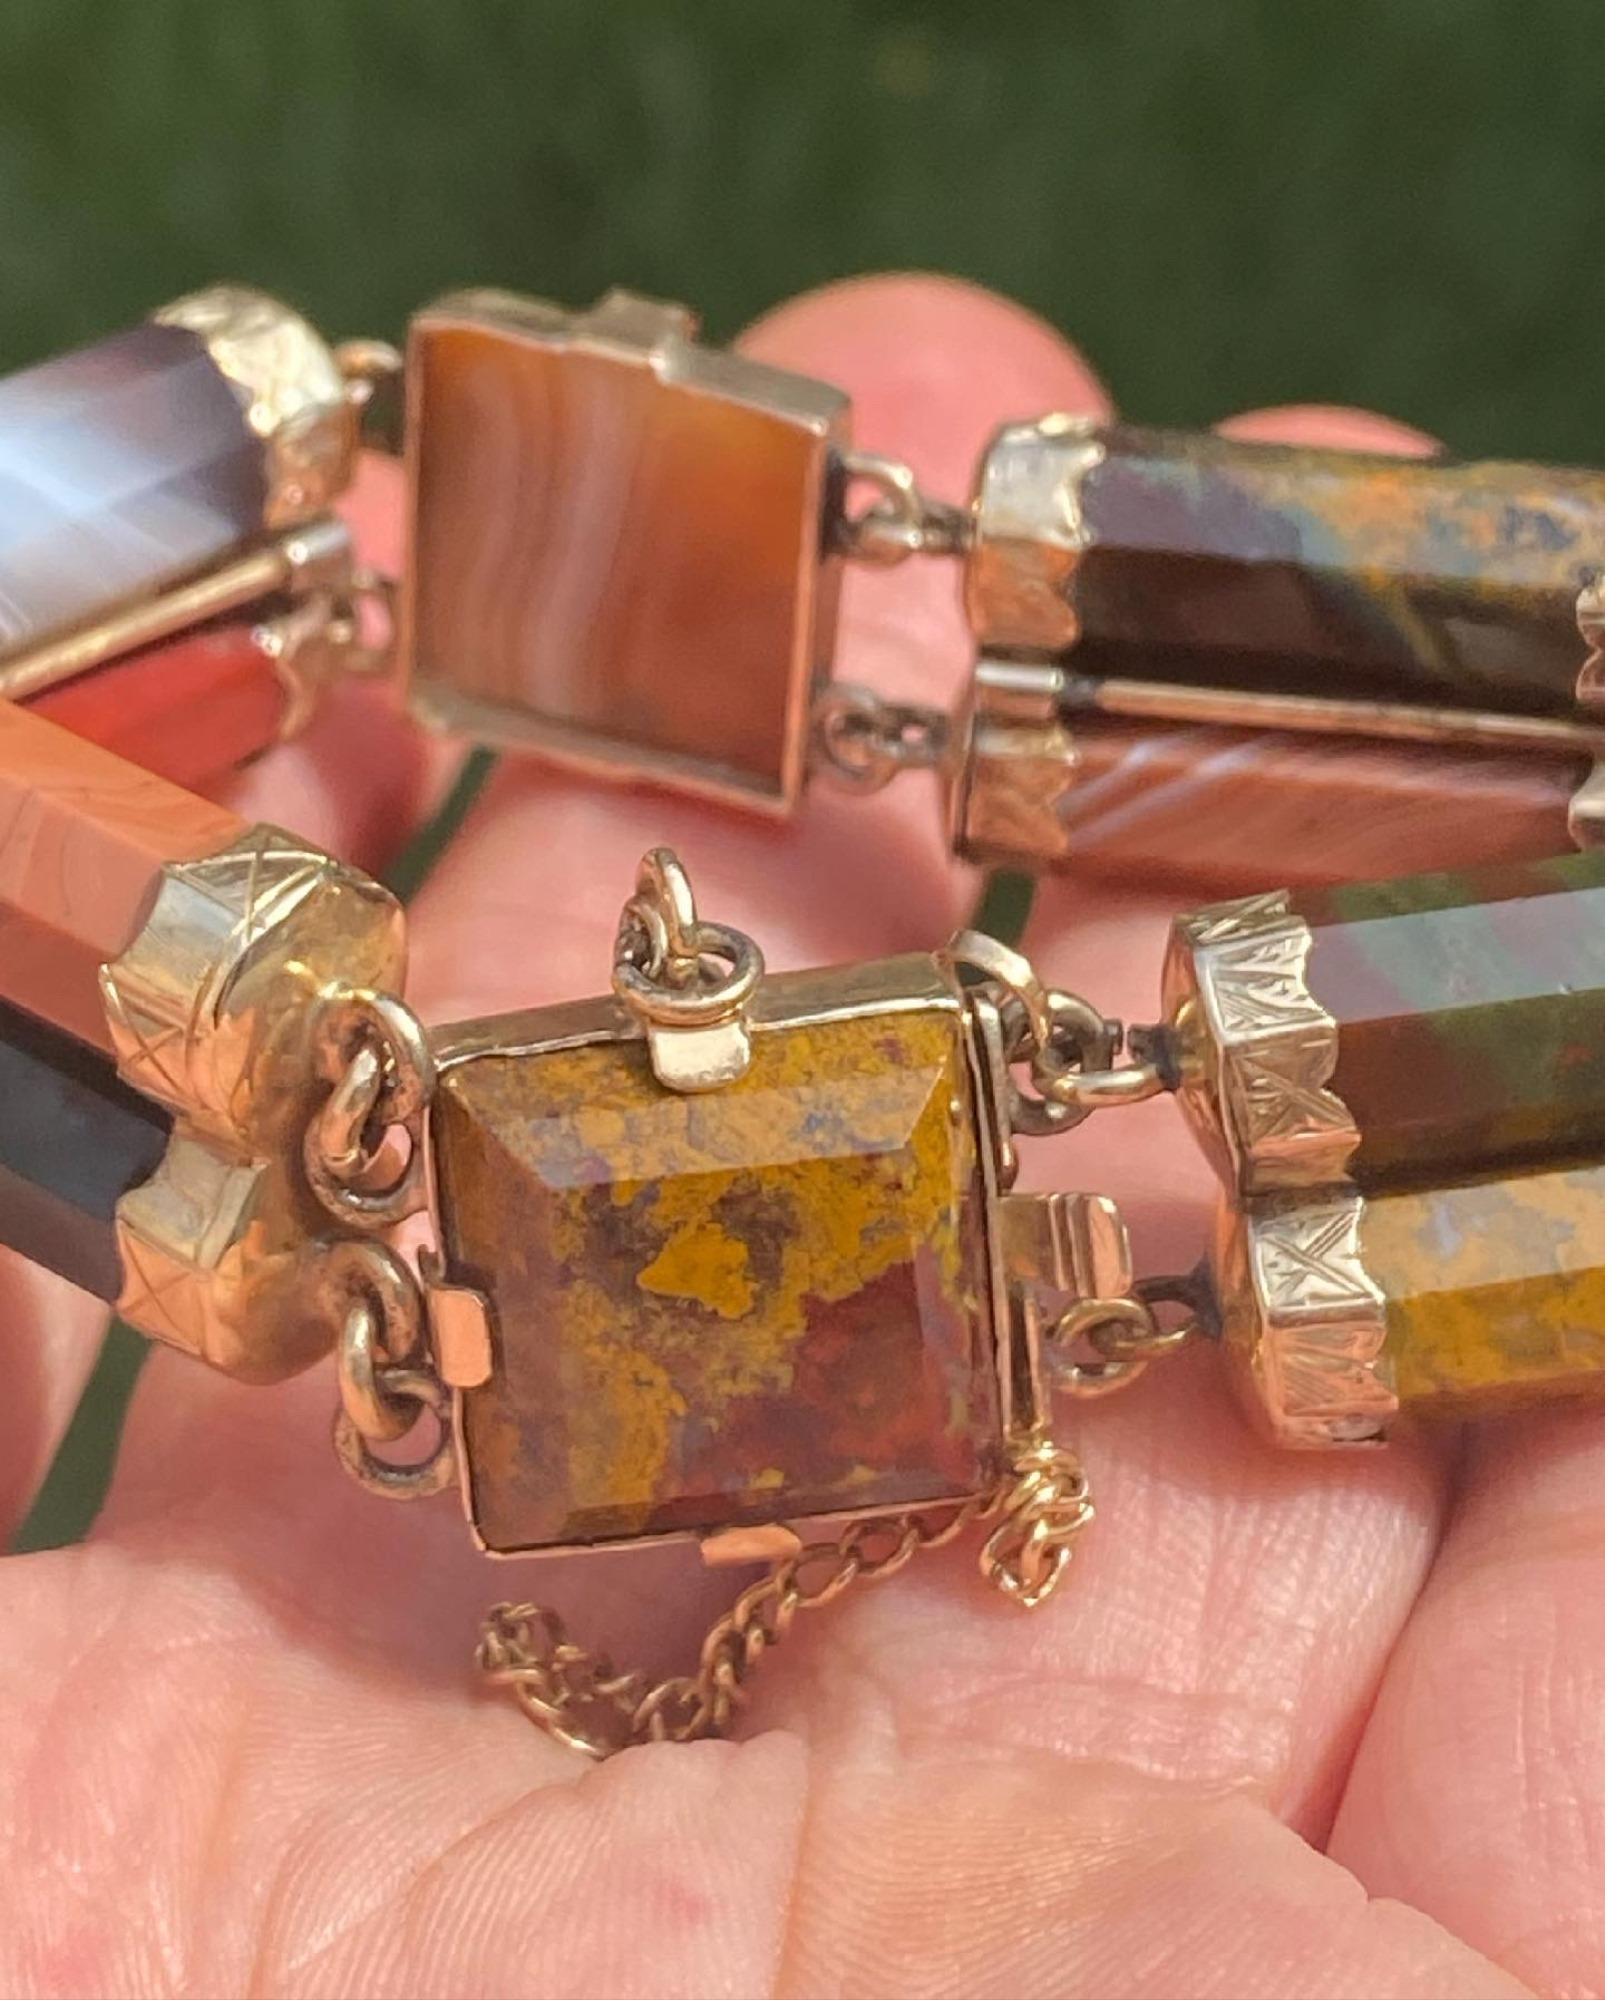 This is a beautiful antique Victorian Scottish agate bracelet in yellow gold circa 1880-1900.  The bracelet is connected by 4 pairs of faceted cylindrical agates 3 square shape agates of various colors and patterns. The terminals and frames are